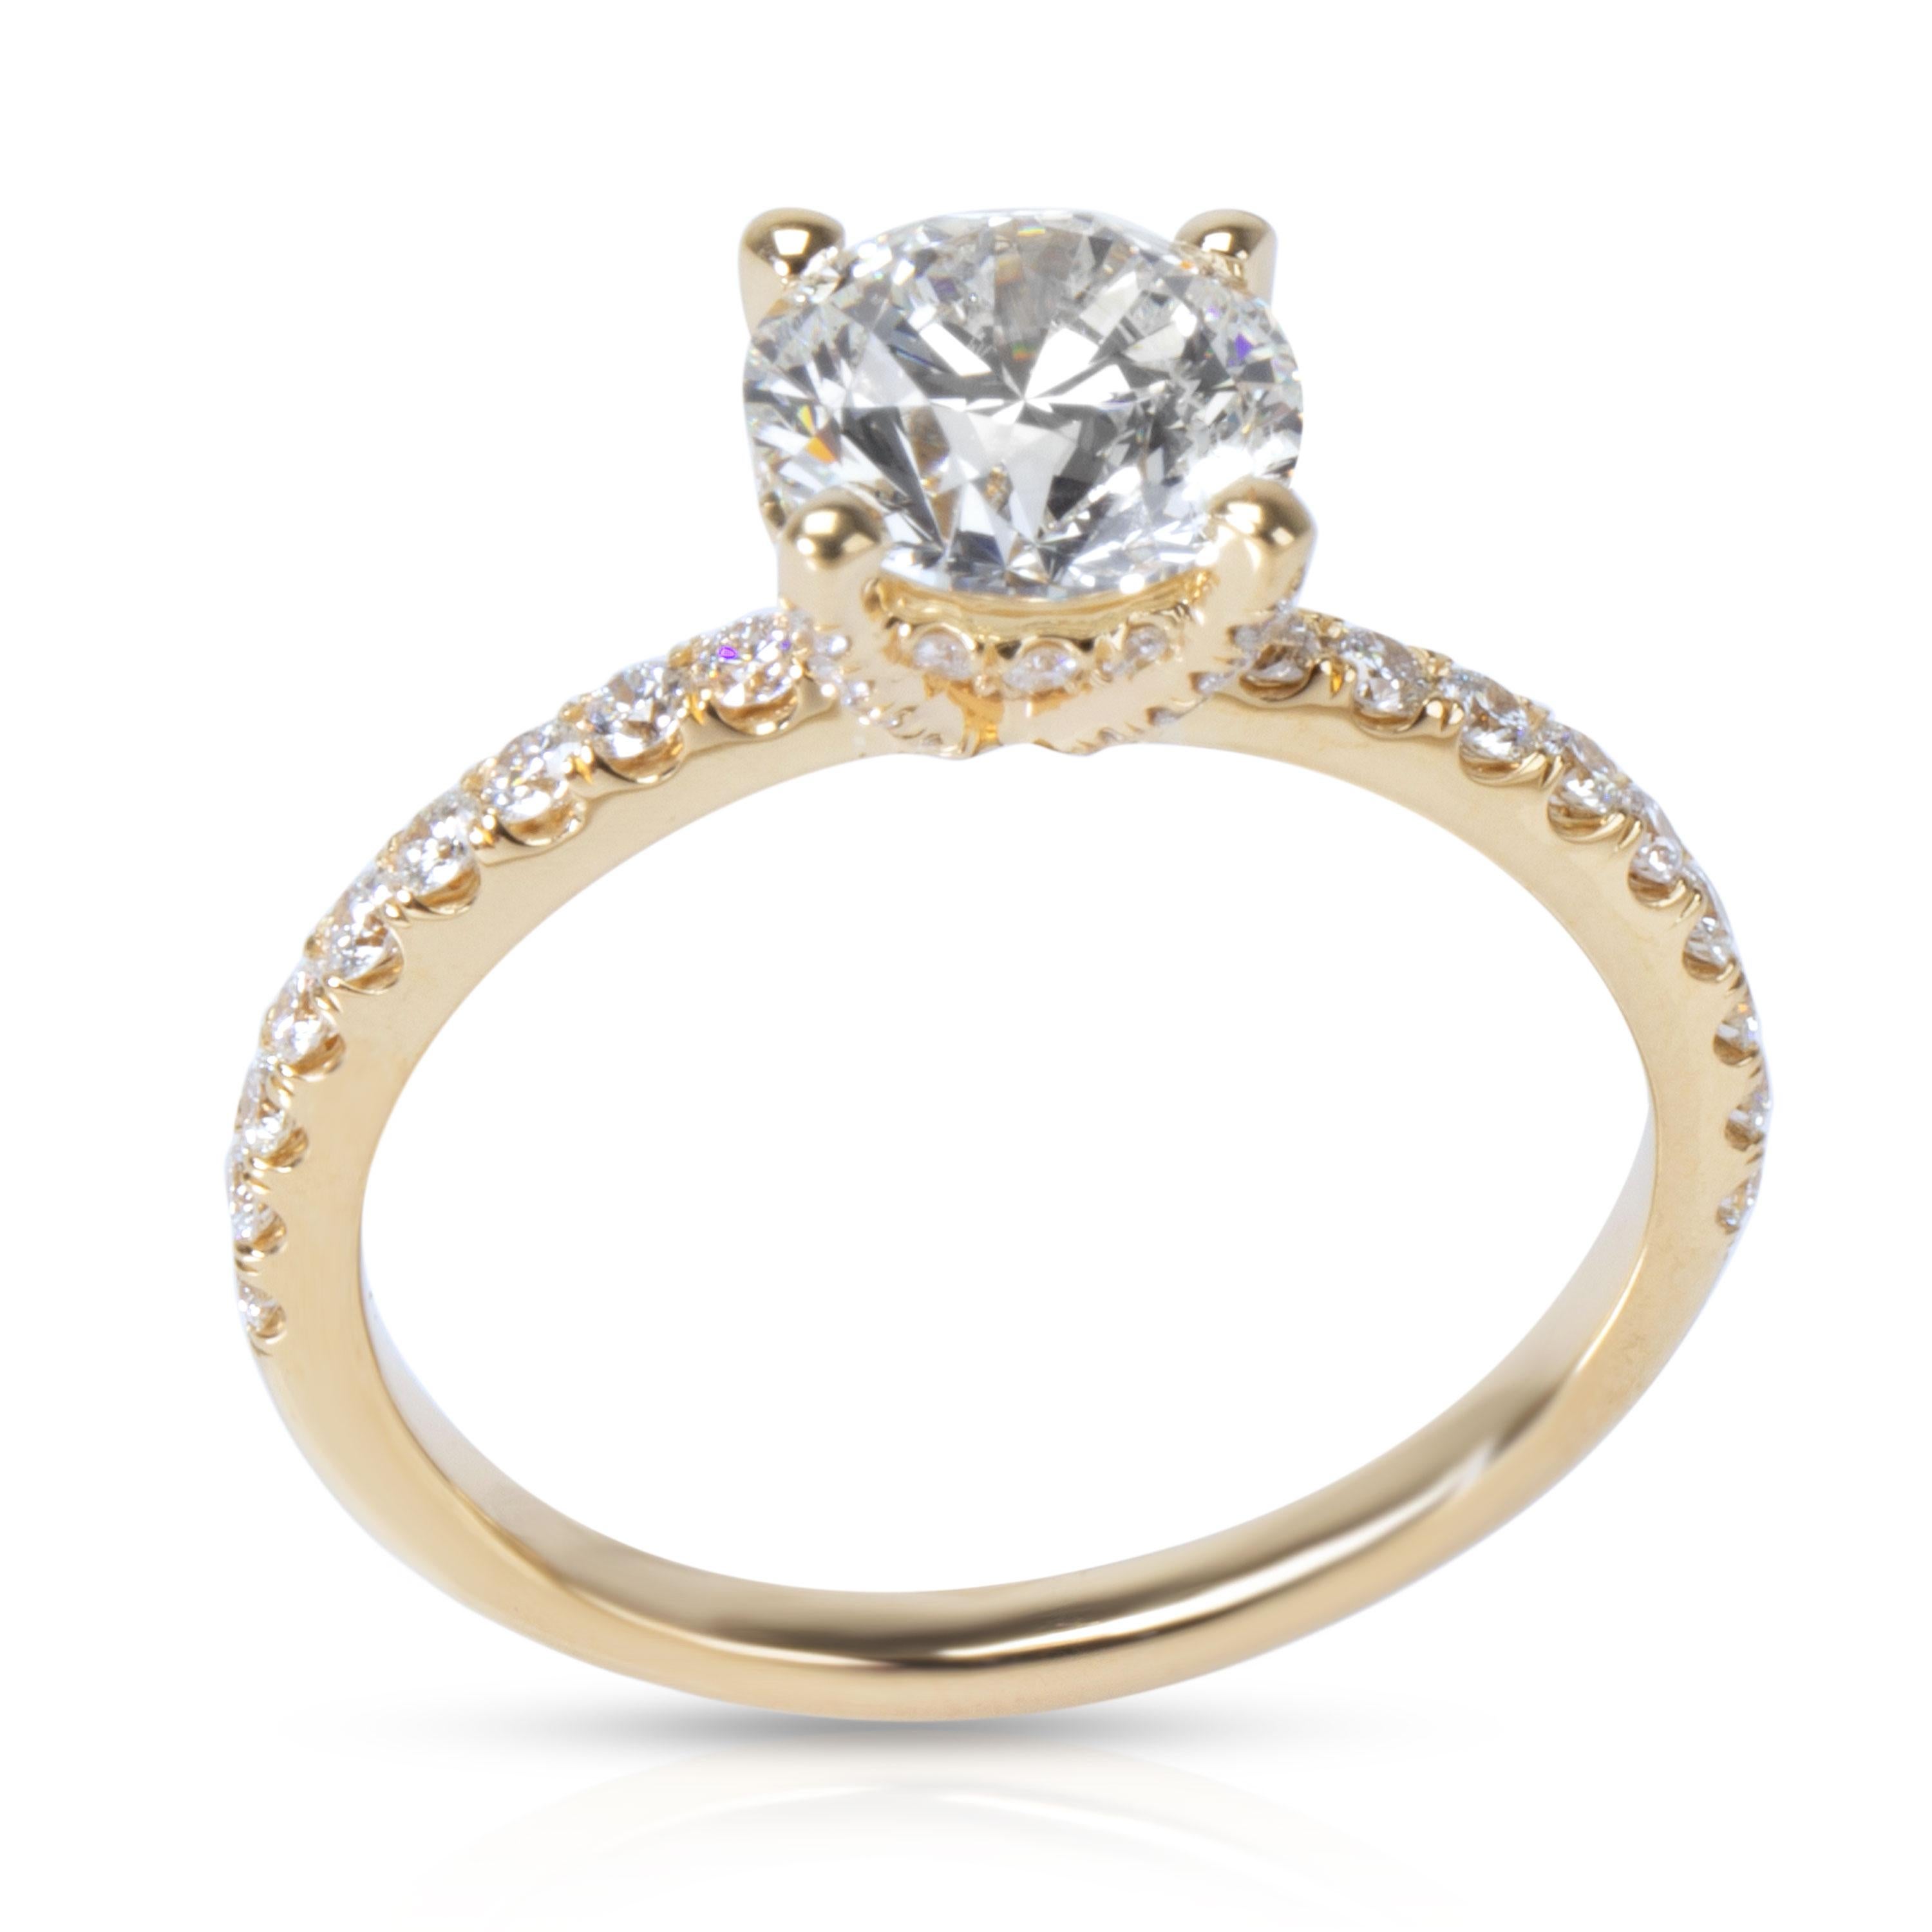 James Allen Diamond Engagement Ring in 14K Yellow Gold GIA G VS1 1.49 CTW

PRIMARY DETAILS

SKU: 105511

Condition Description: Retails for 12000 USD. In excellent condition and recently polished. Ring size is 4.75. Comes with the original box and